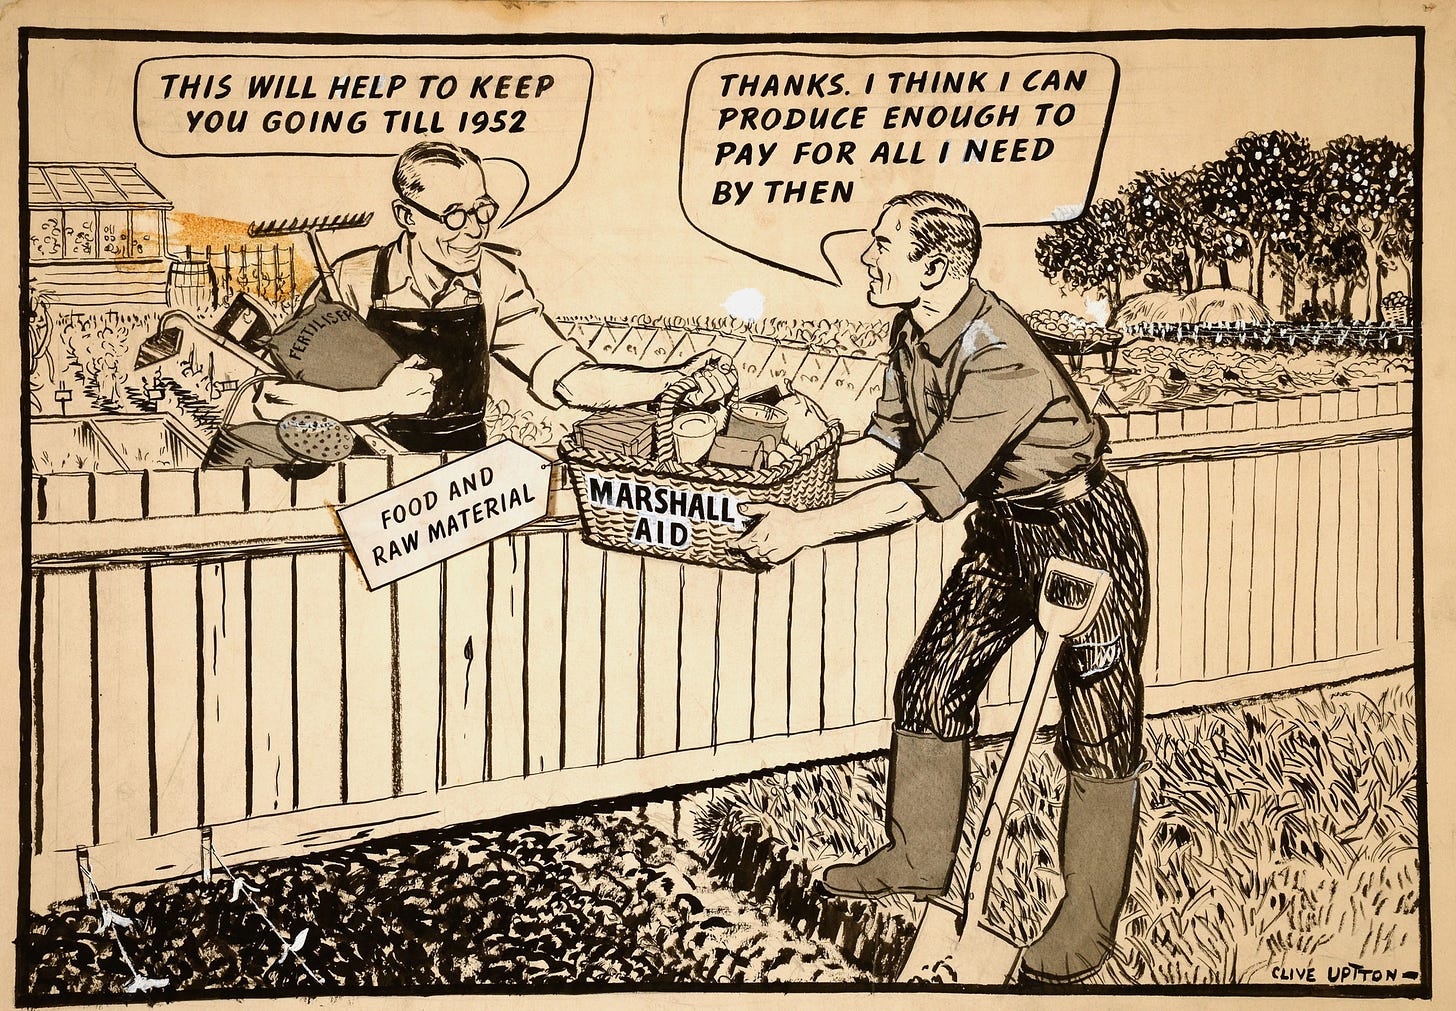 Illustration in which a man hands his neighbour a basket labelled ‘Marshall Aid’ over the fence separating their backyards.